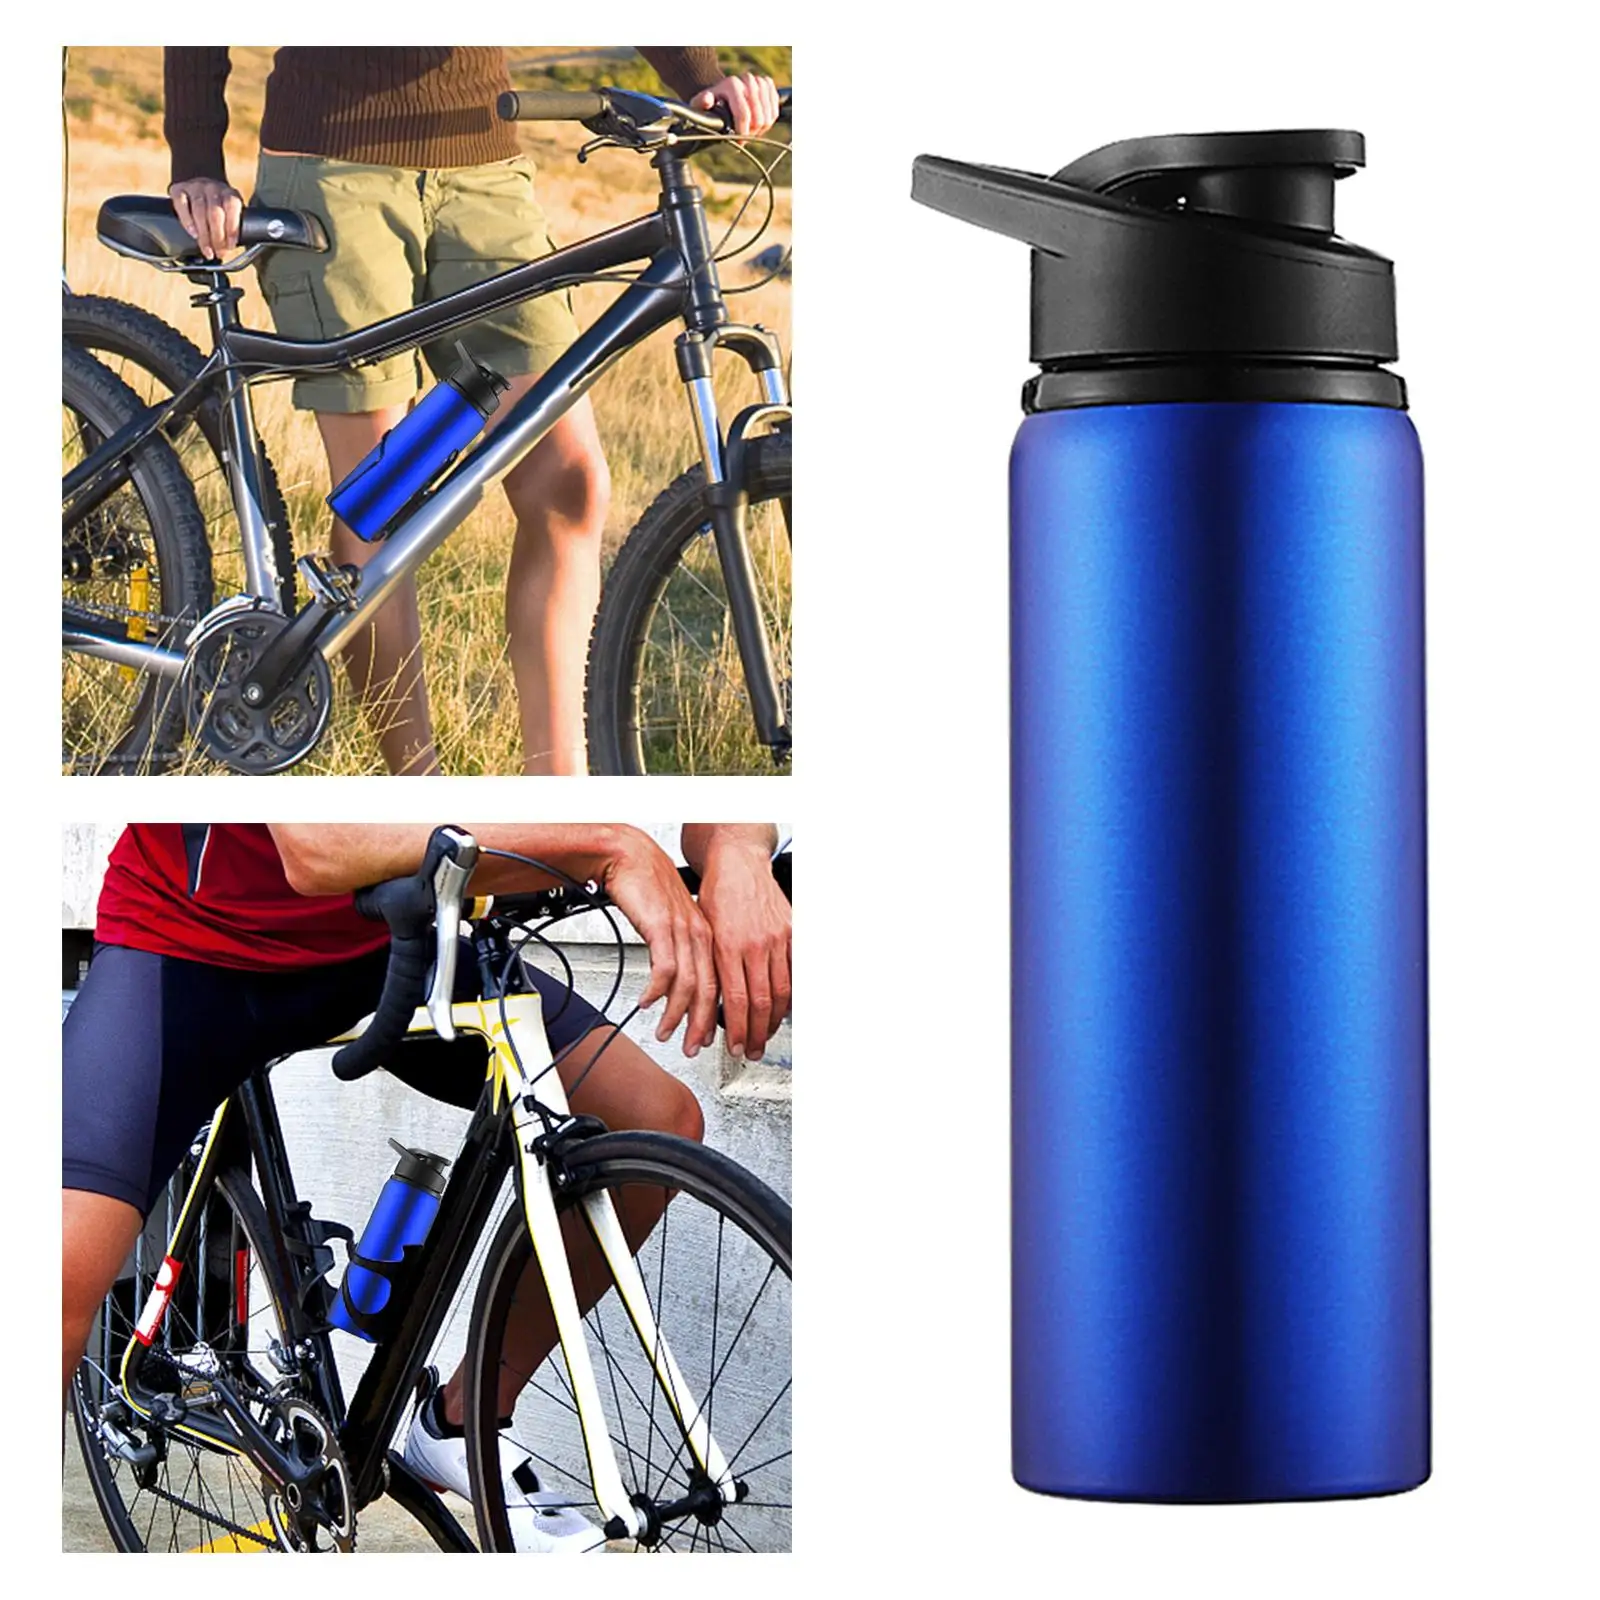 Large 700ml Water Bottle Kettle for Running Gym Workout Cycling Camping Accs